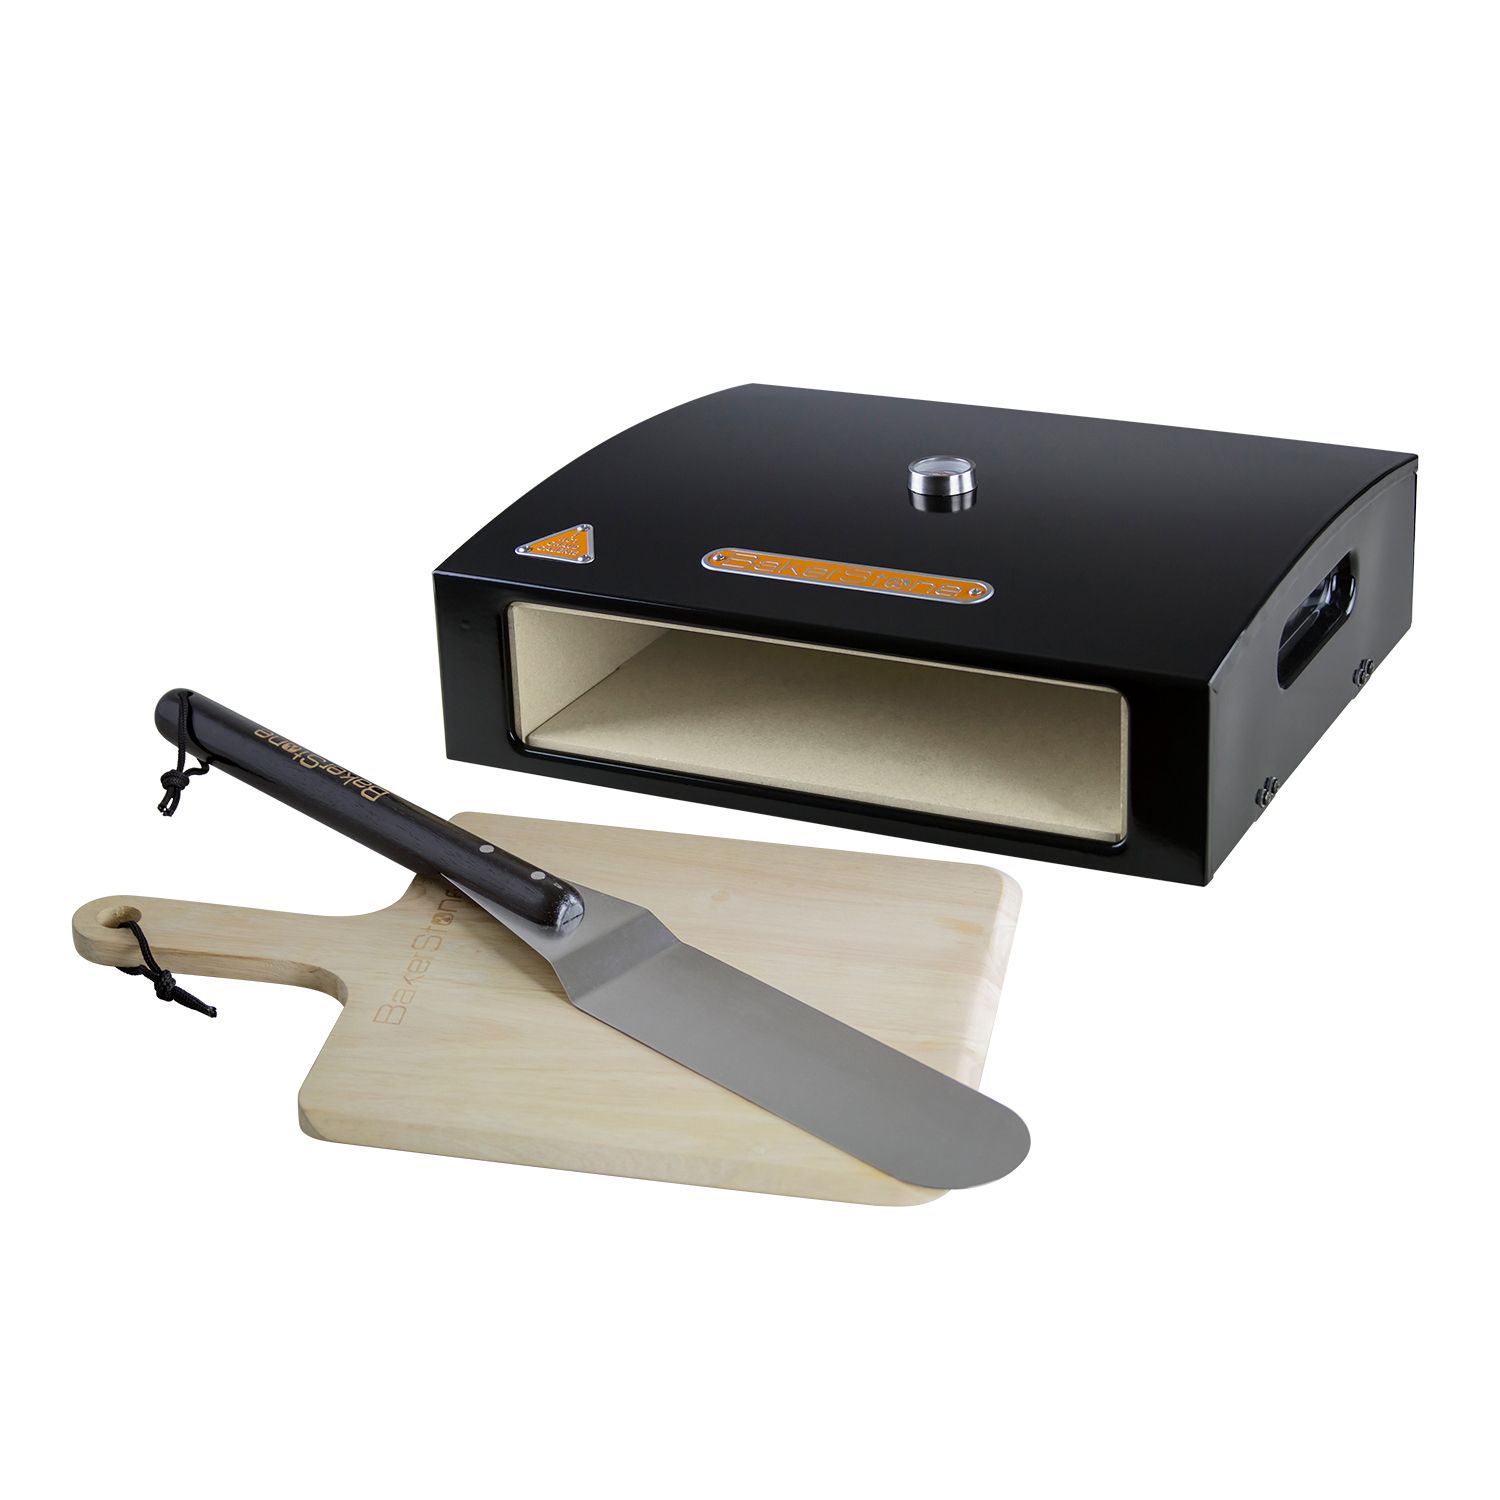 BakerStone Basics Series Grill Top Pizza Oven Box Kit - image 2 of 7